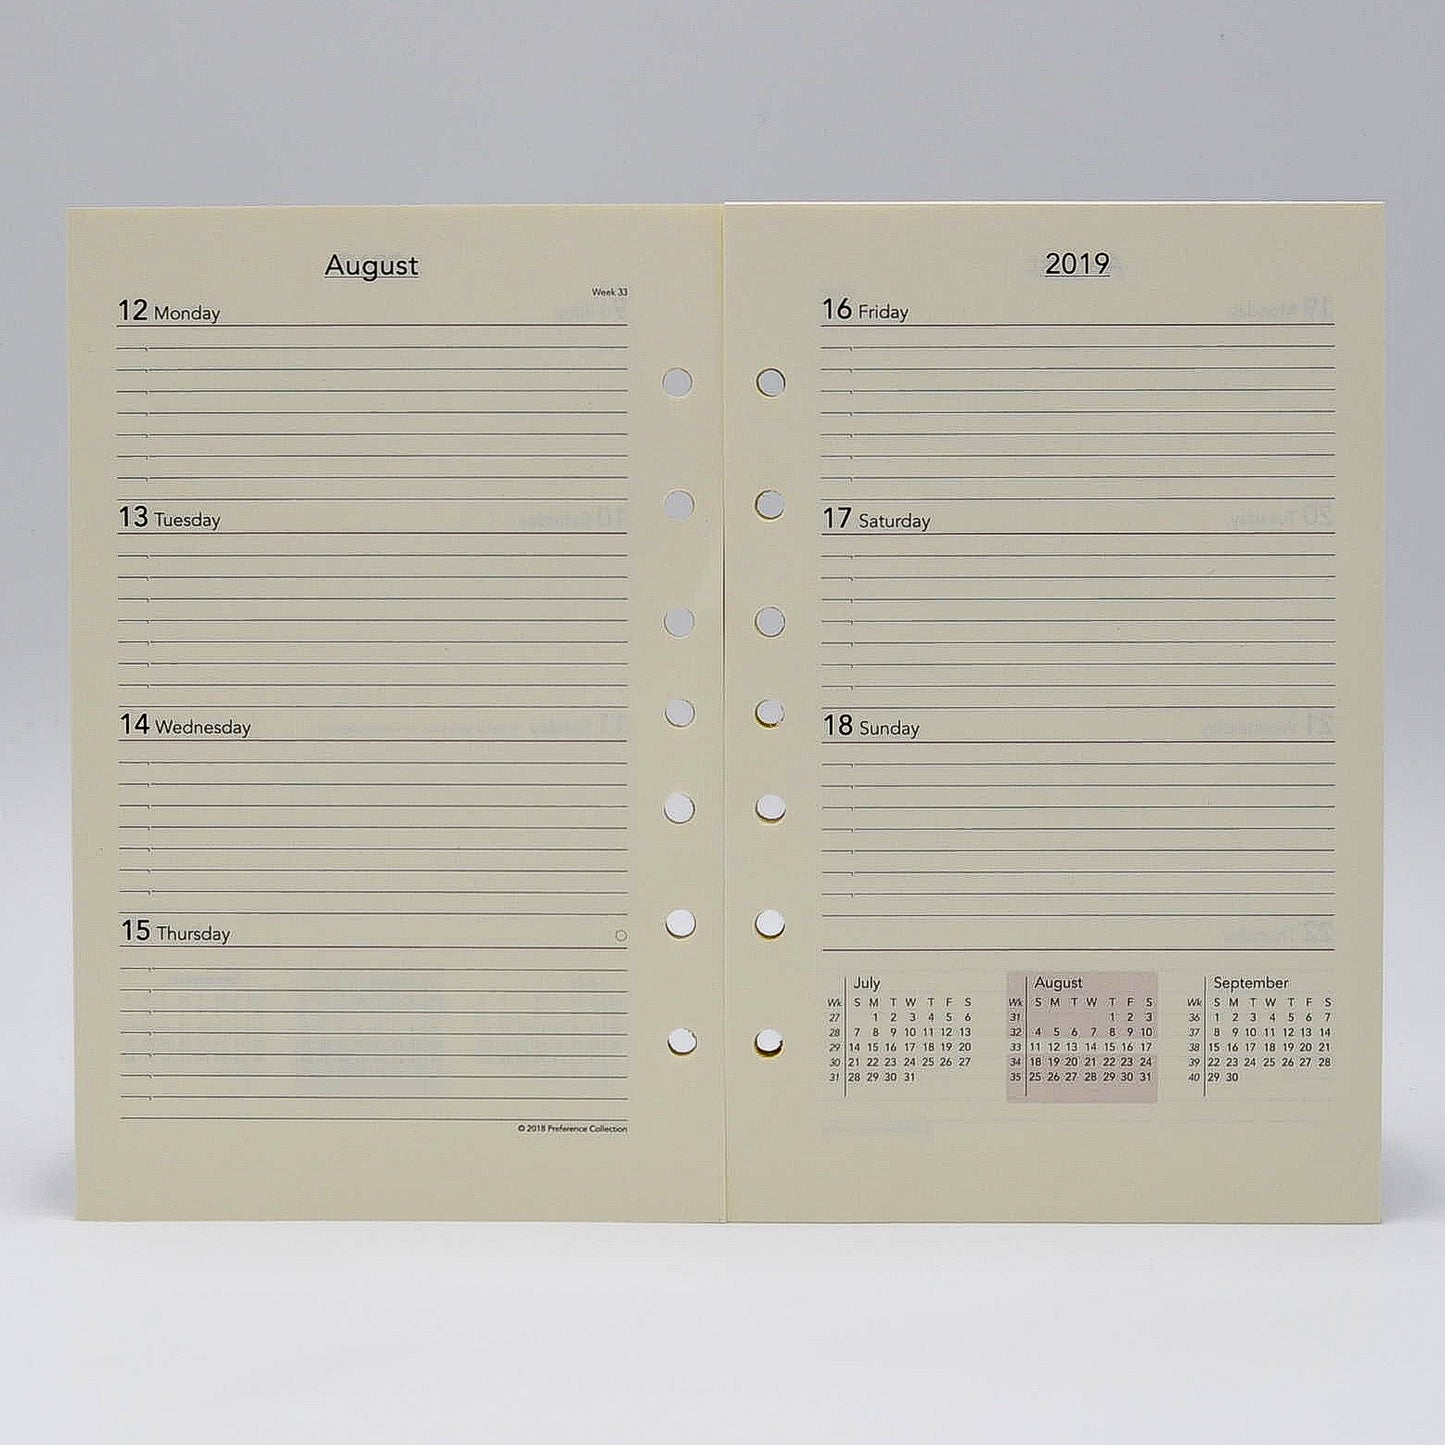 Preference Collection: PD827I 8-1/2 x 5-1/2 7-hole Planner monthly weekly calendar for 2019 or 2020 ivory loose leaf